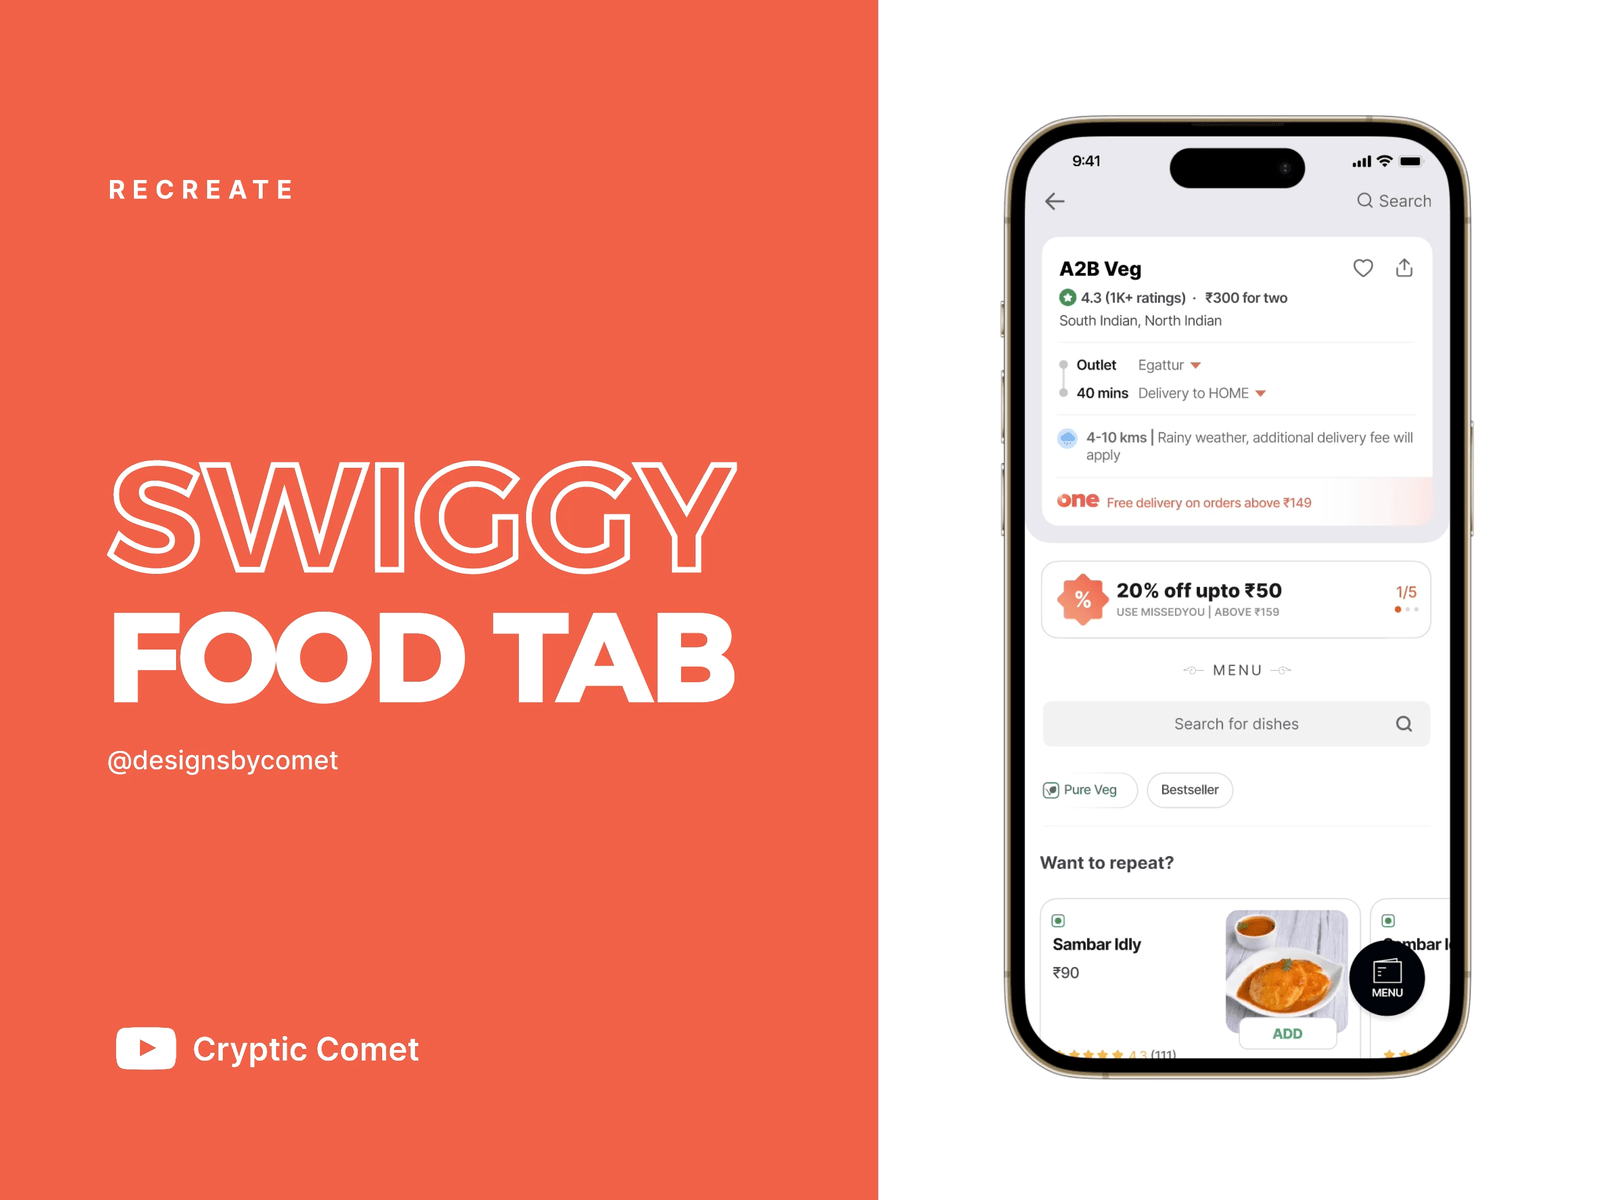 Swiggy Food Tab has 2 Search Buttons?